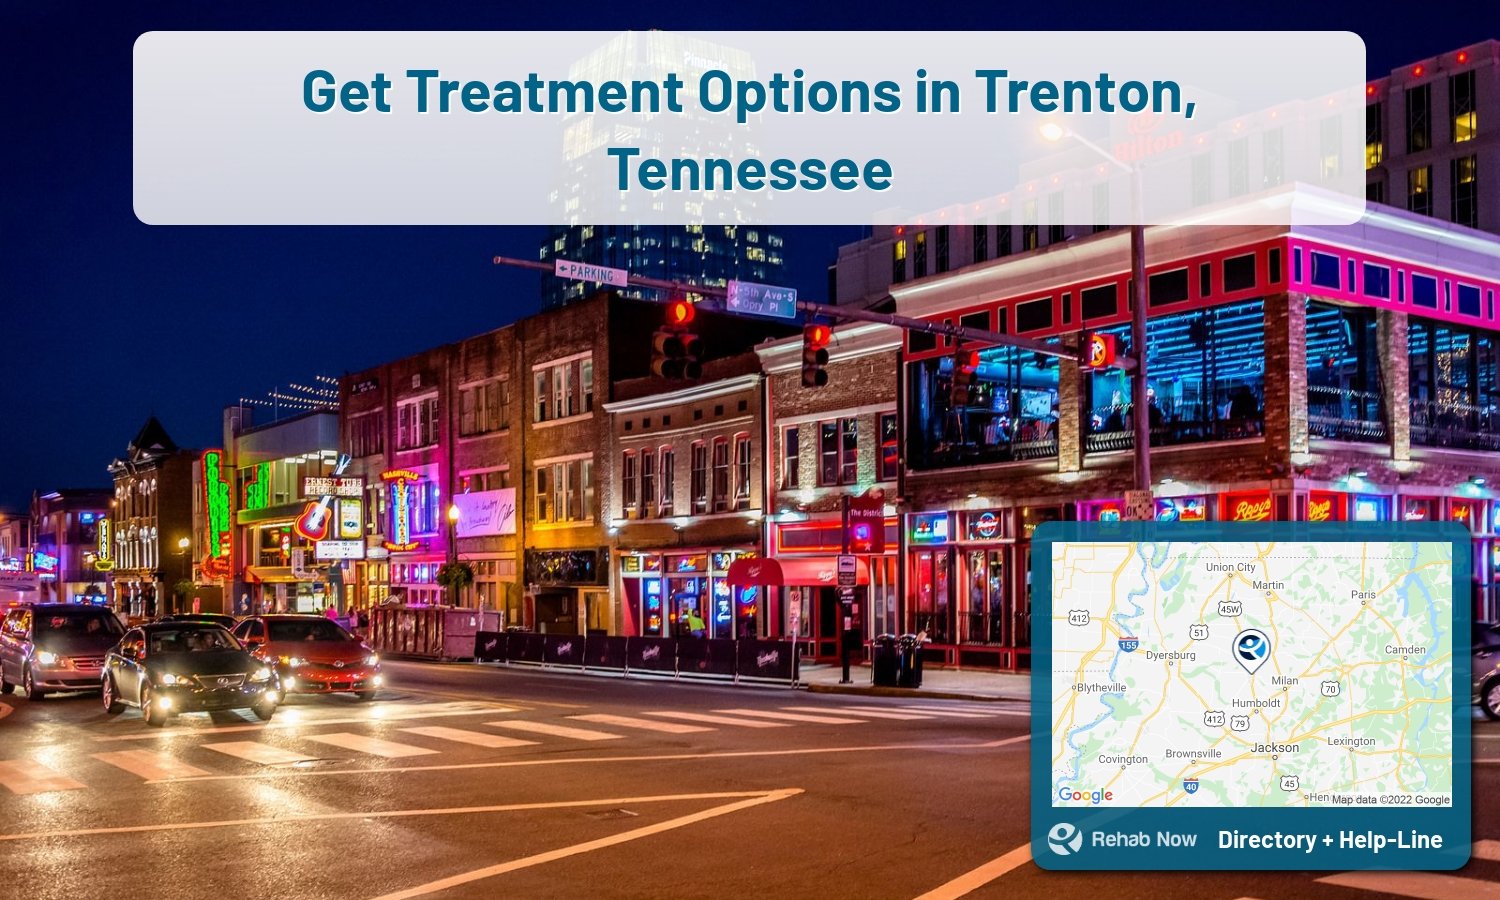 Let our expert counselors help find the best addiction treatment in Trenton, Tennessee now with a free call to our hotline.